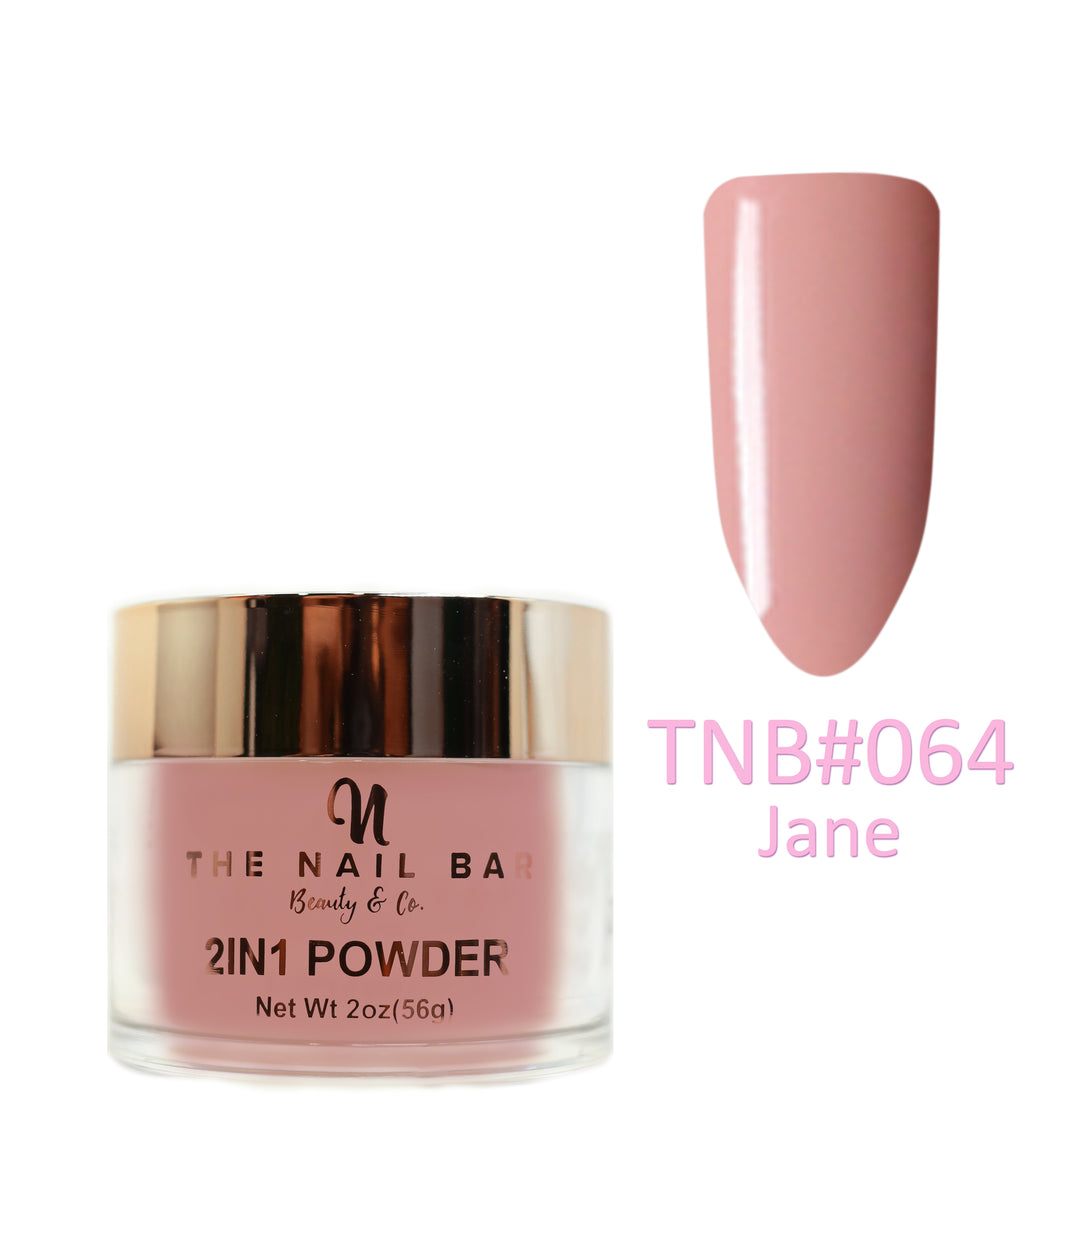 2-In-1 Dipping/Acrylic colour powder (2oz) -Jane - The Nail Bar Beauty & Co.